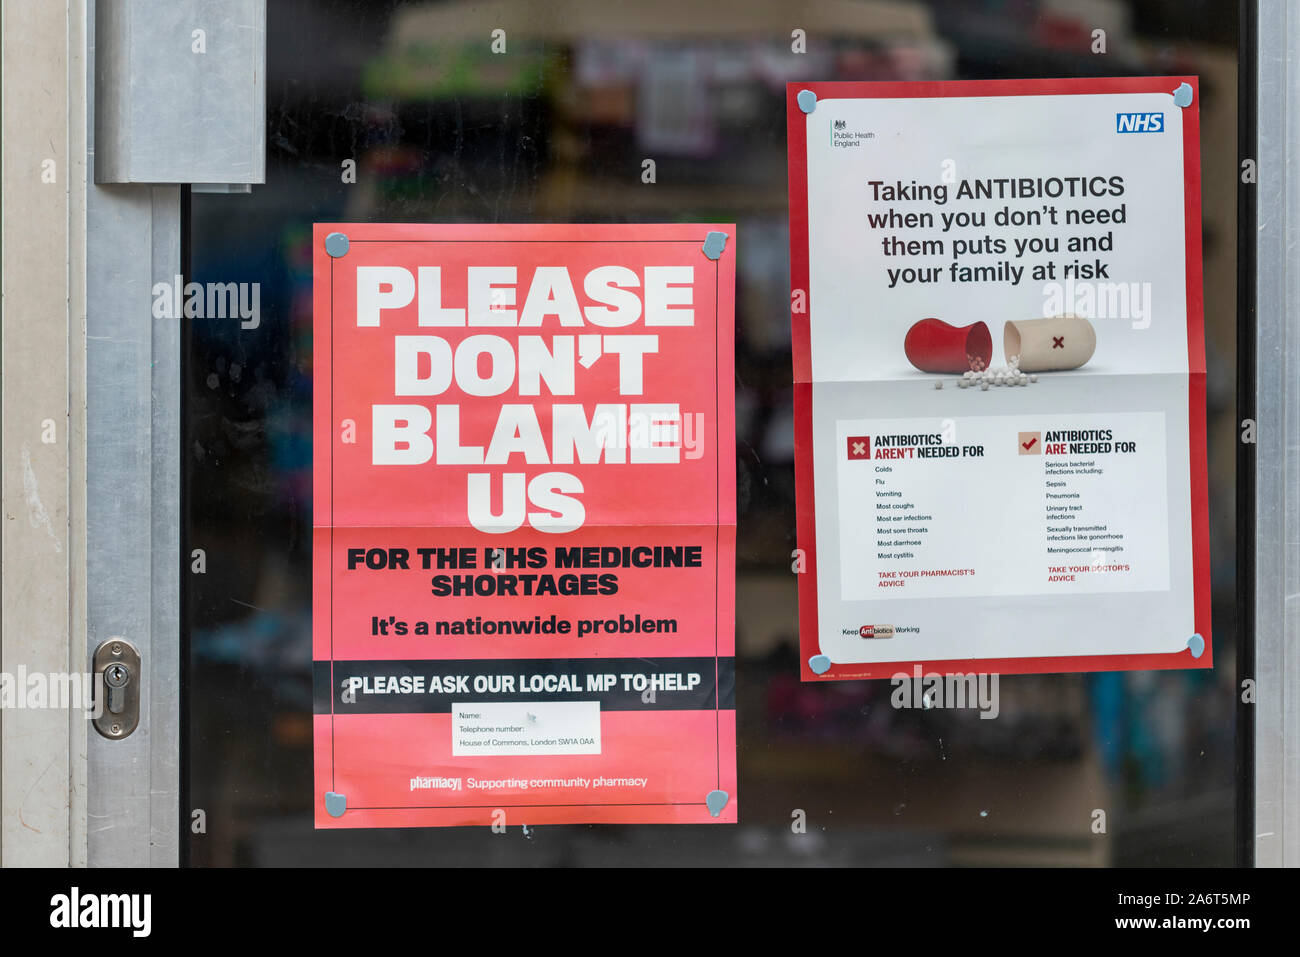 NHS medicine shortages. Poster in window of chemist stating Please don't blame us for the NHS medicine shortages It's a nationwide problem. Ask MP Stock Photo